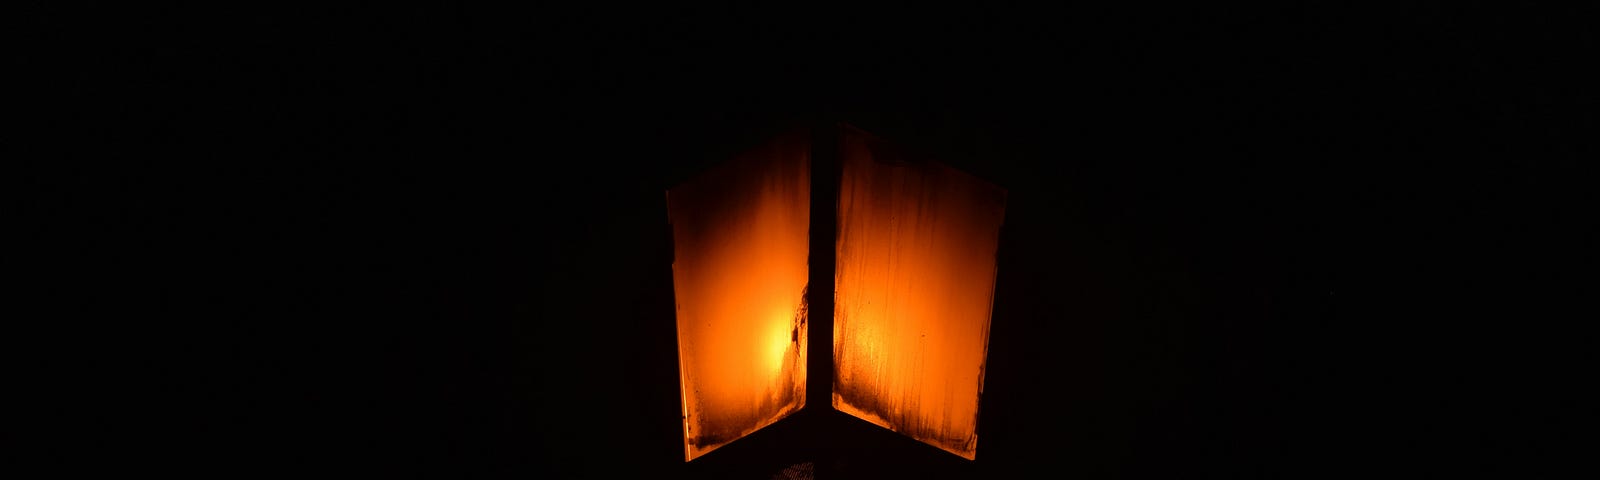 A canted view from below of what looks like a gas streetlamp. It glows orange is enveloped in a completely black background.